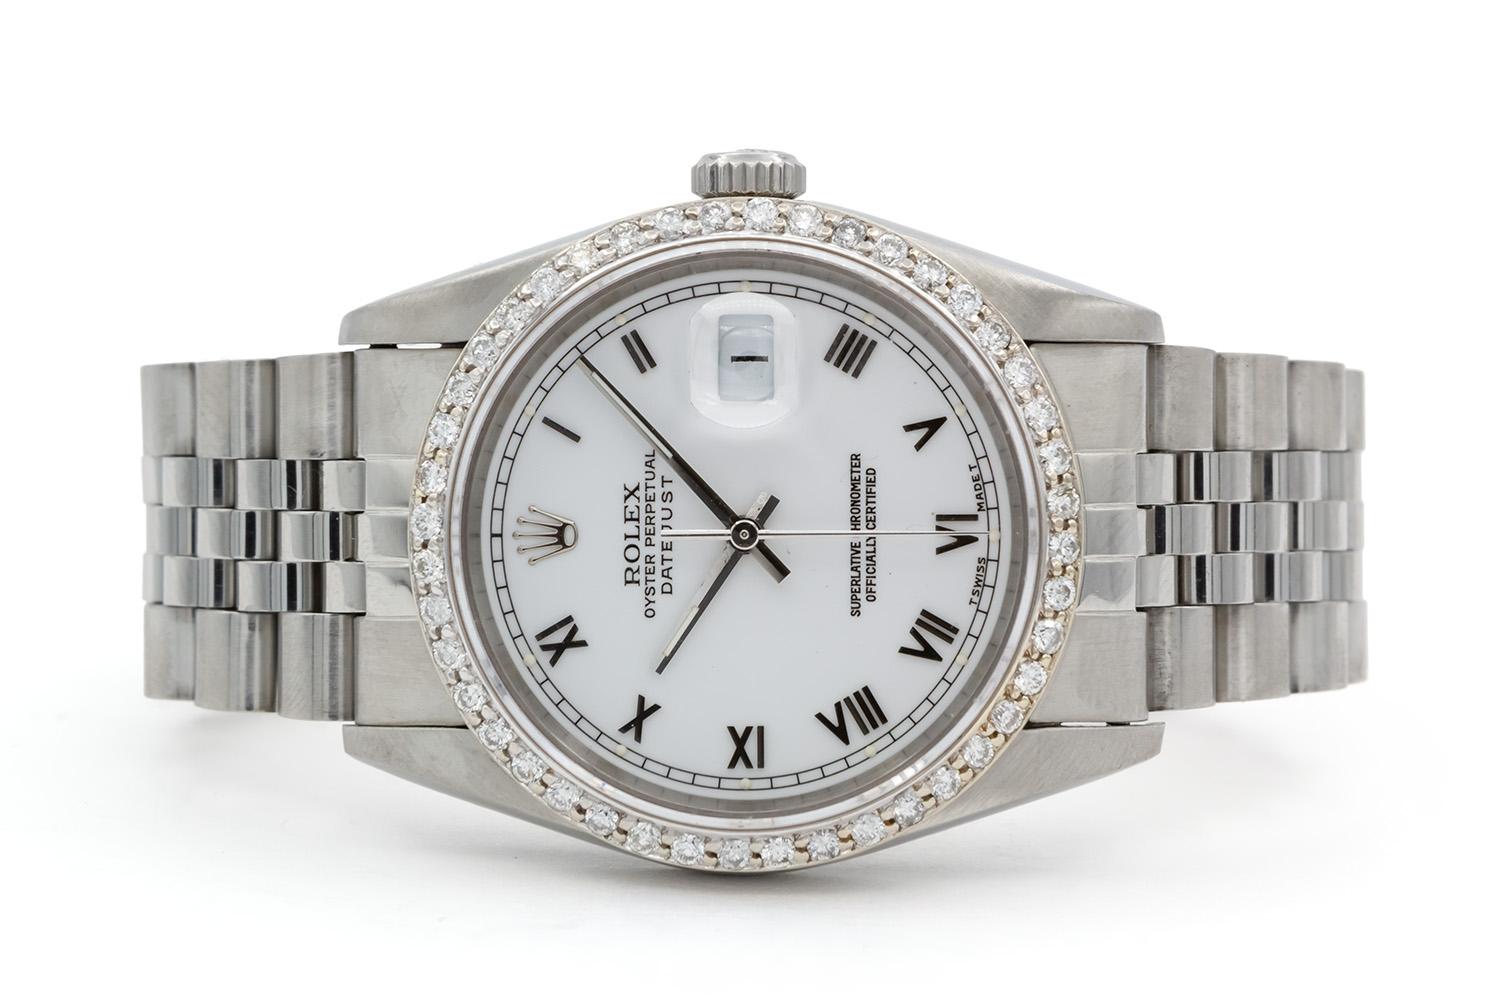 We are pleased to offer this 1990 Rolex Datejust 16220. This is a great Rolex for a man or a woman especially with women wearing larger watches these days. It features a 36mm stainless steel case and jubilee bracelet, custom white roman dial and